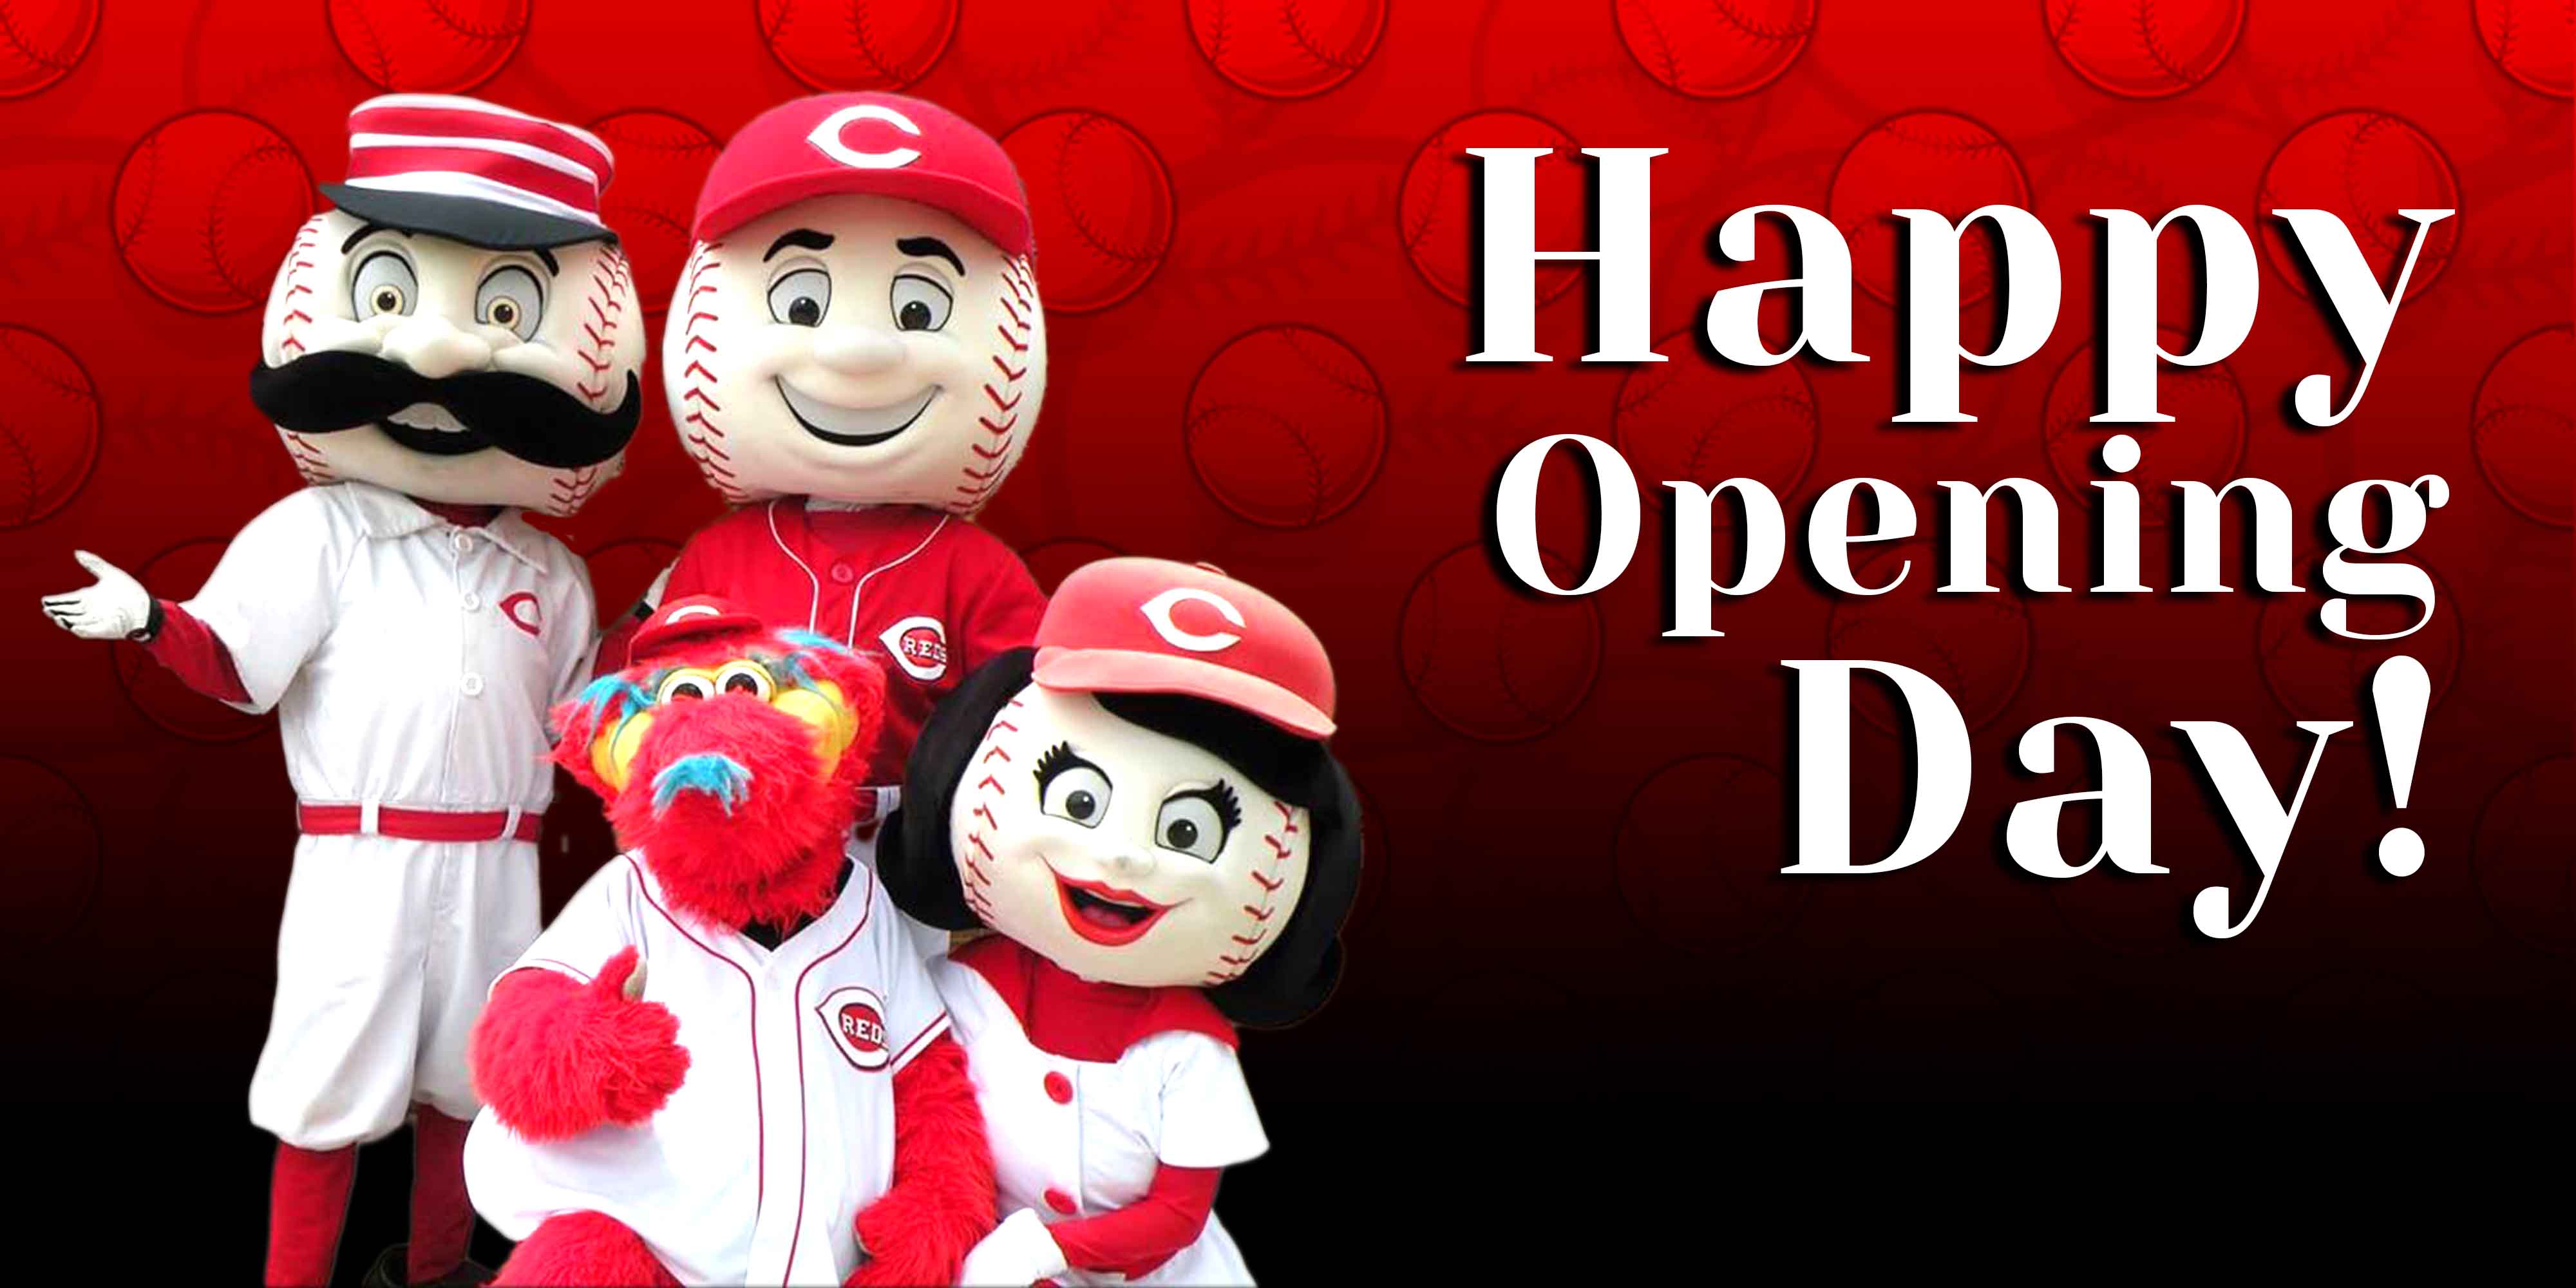 Happy Opening Day!